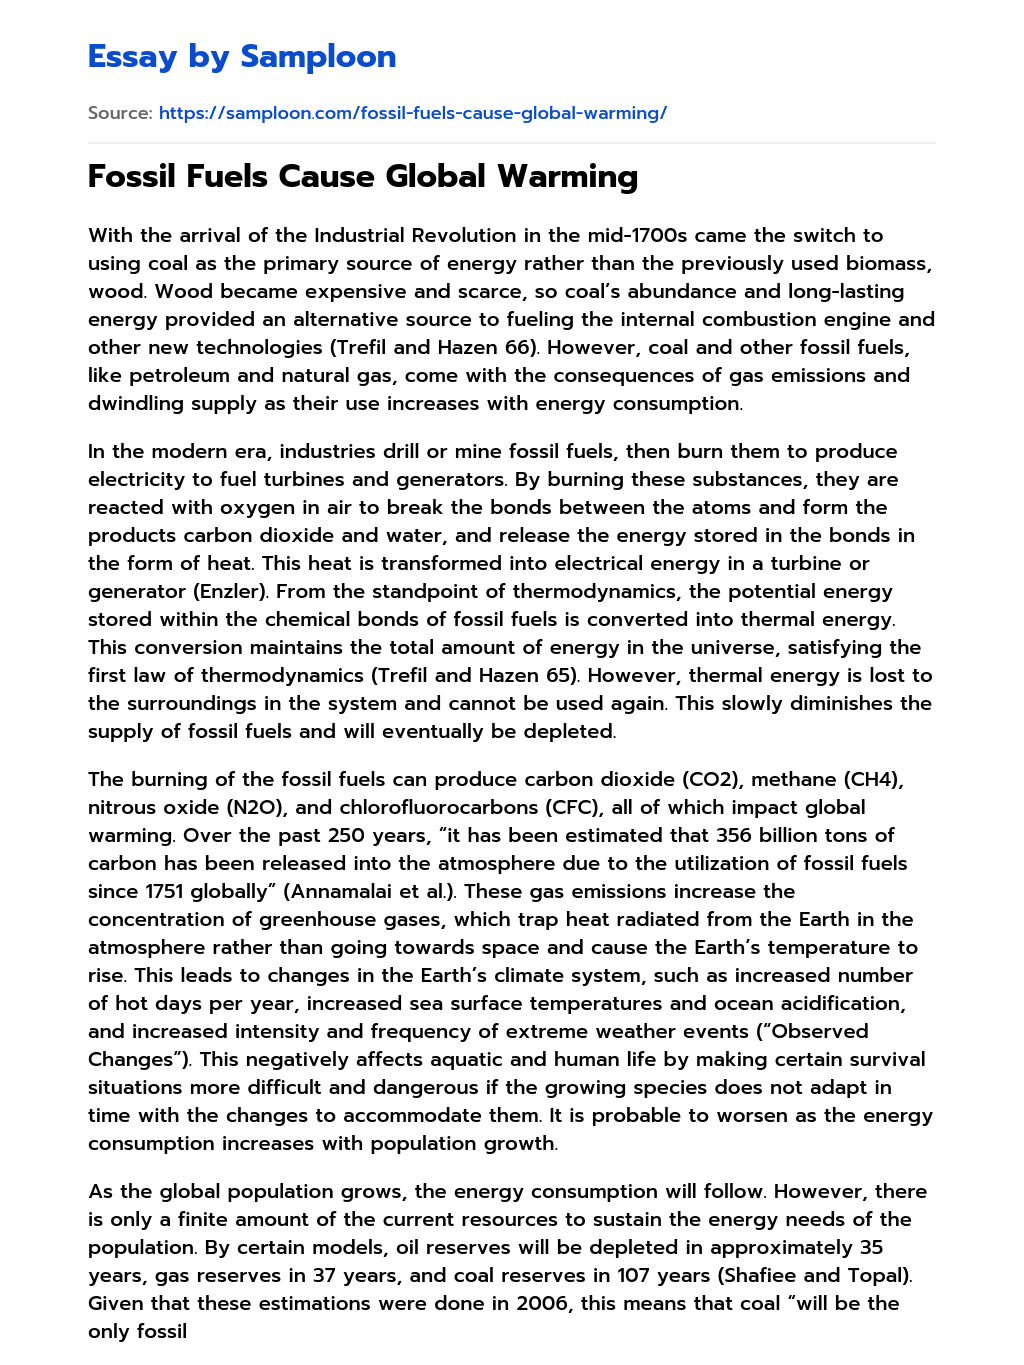 Fossil Fuels Cause Global Warming essay